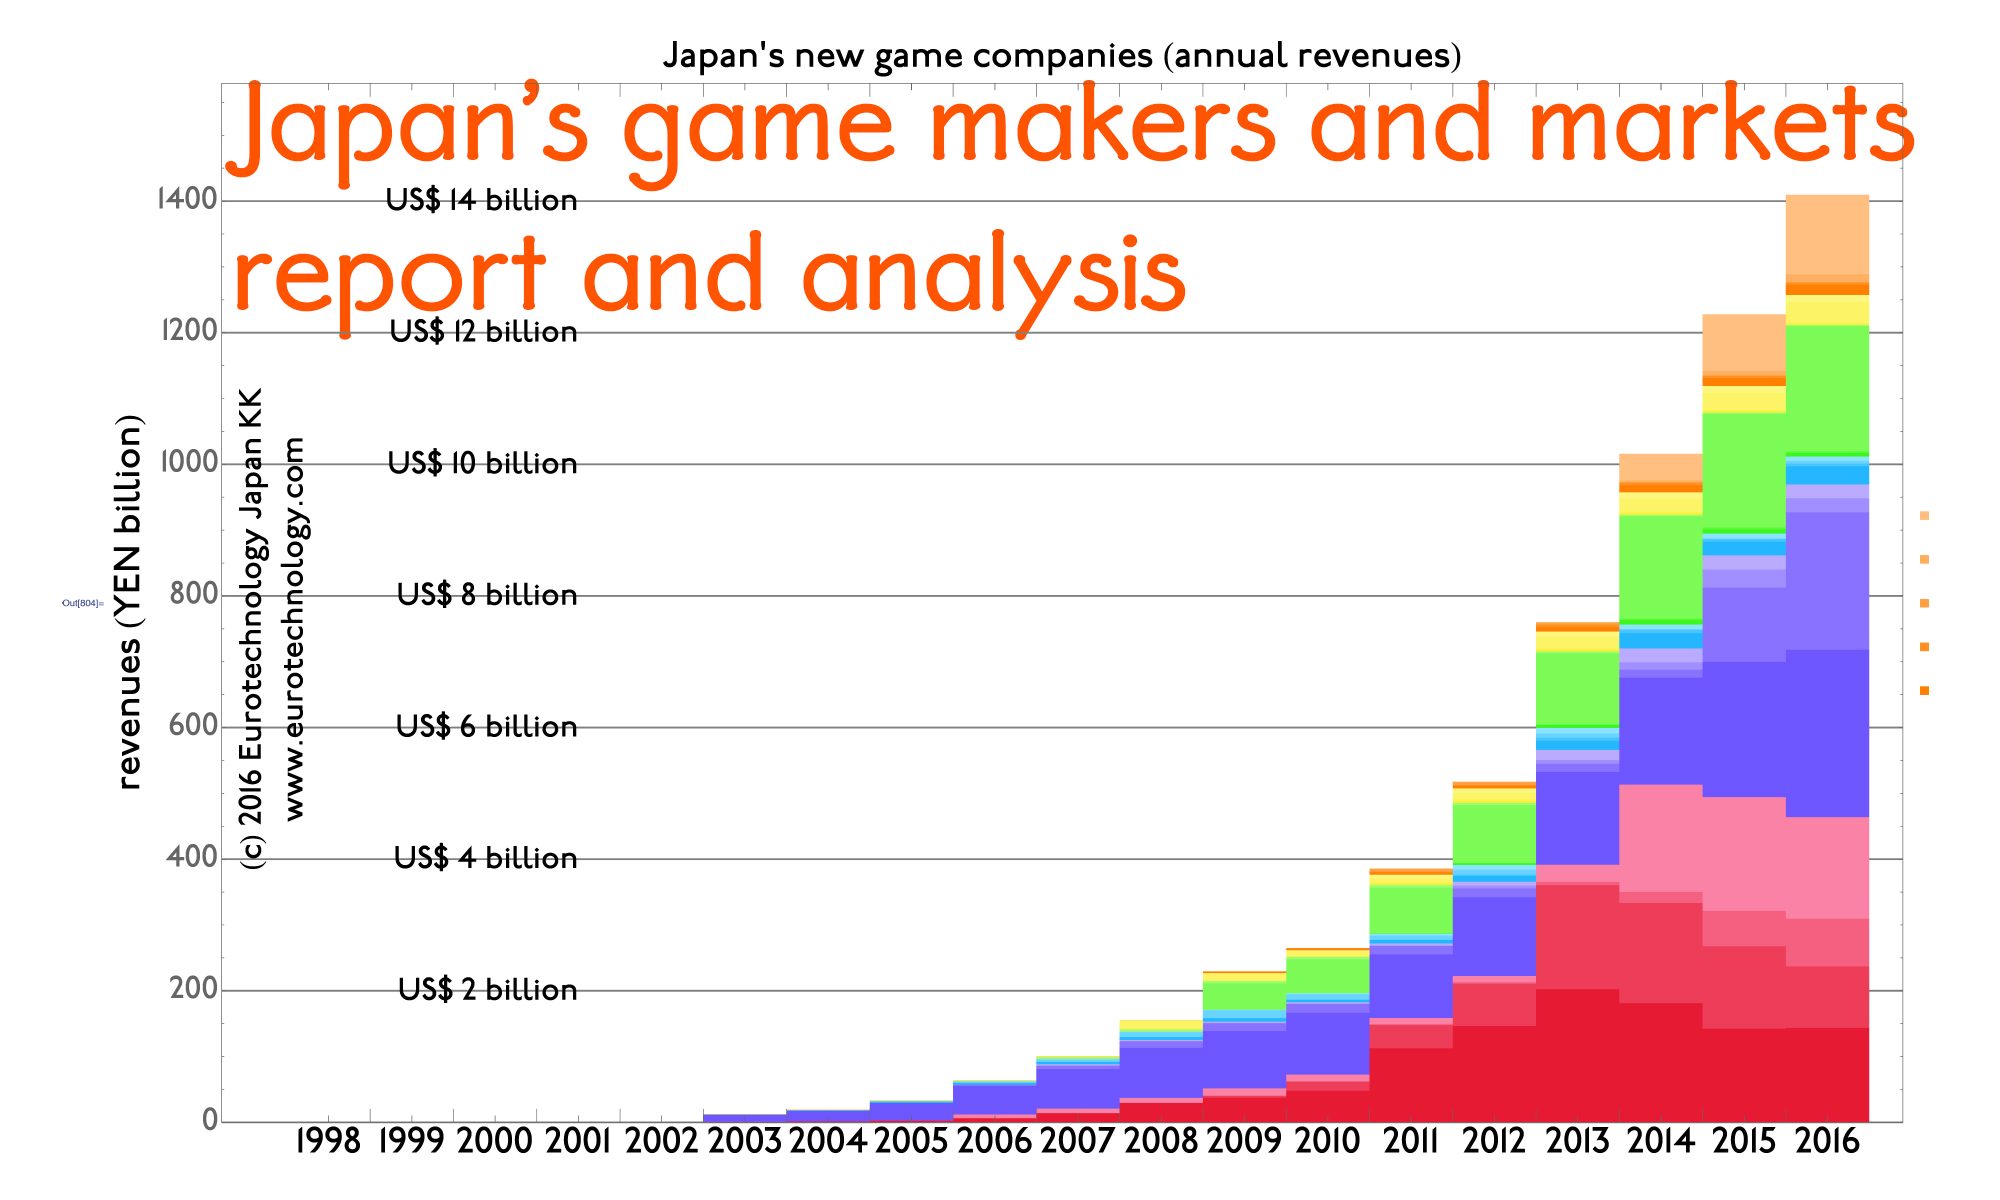 Eurotechnology report: JAPAN’S GAME MAKERS AND MARKETS – DISRUPTION BY SMARTPHONE GAMES